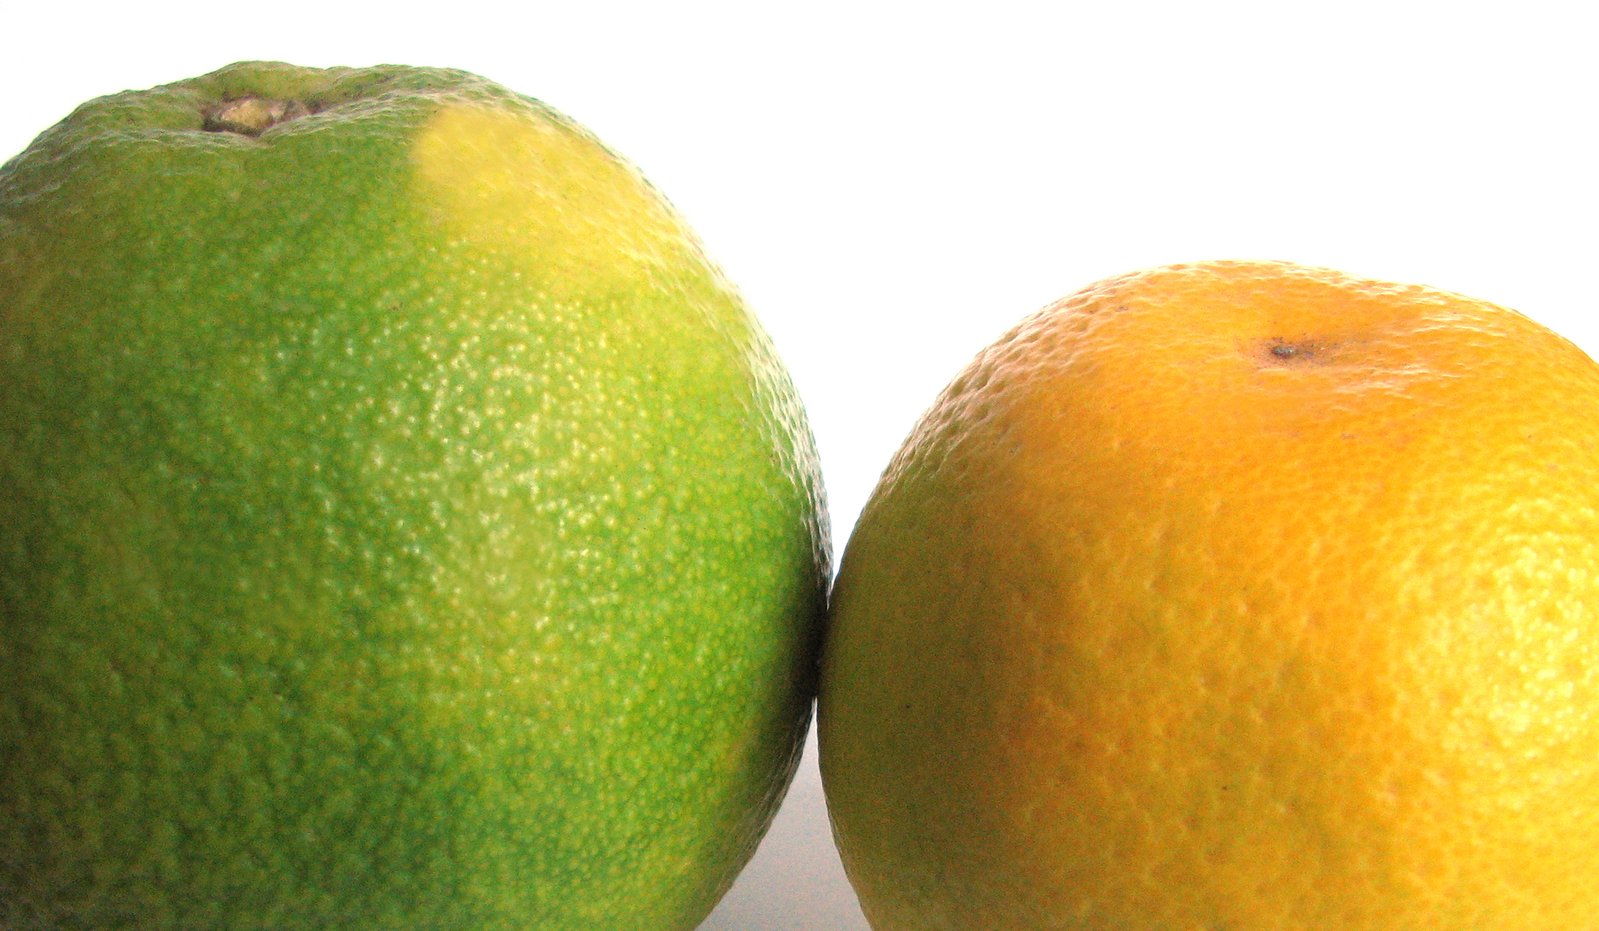 there are two different kinds of oranges